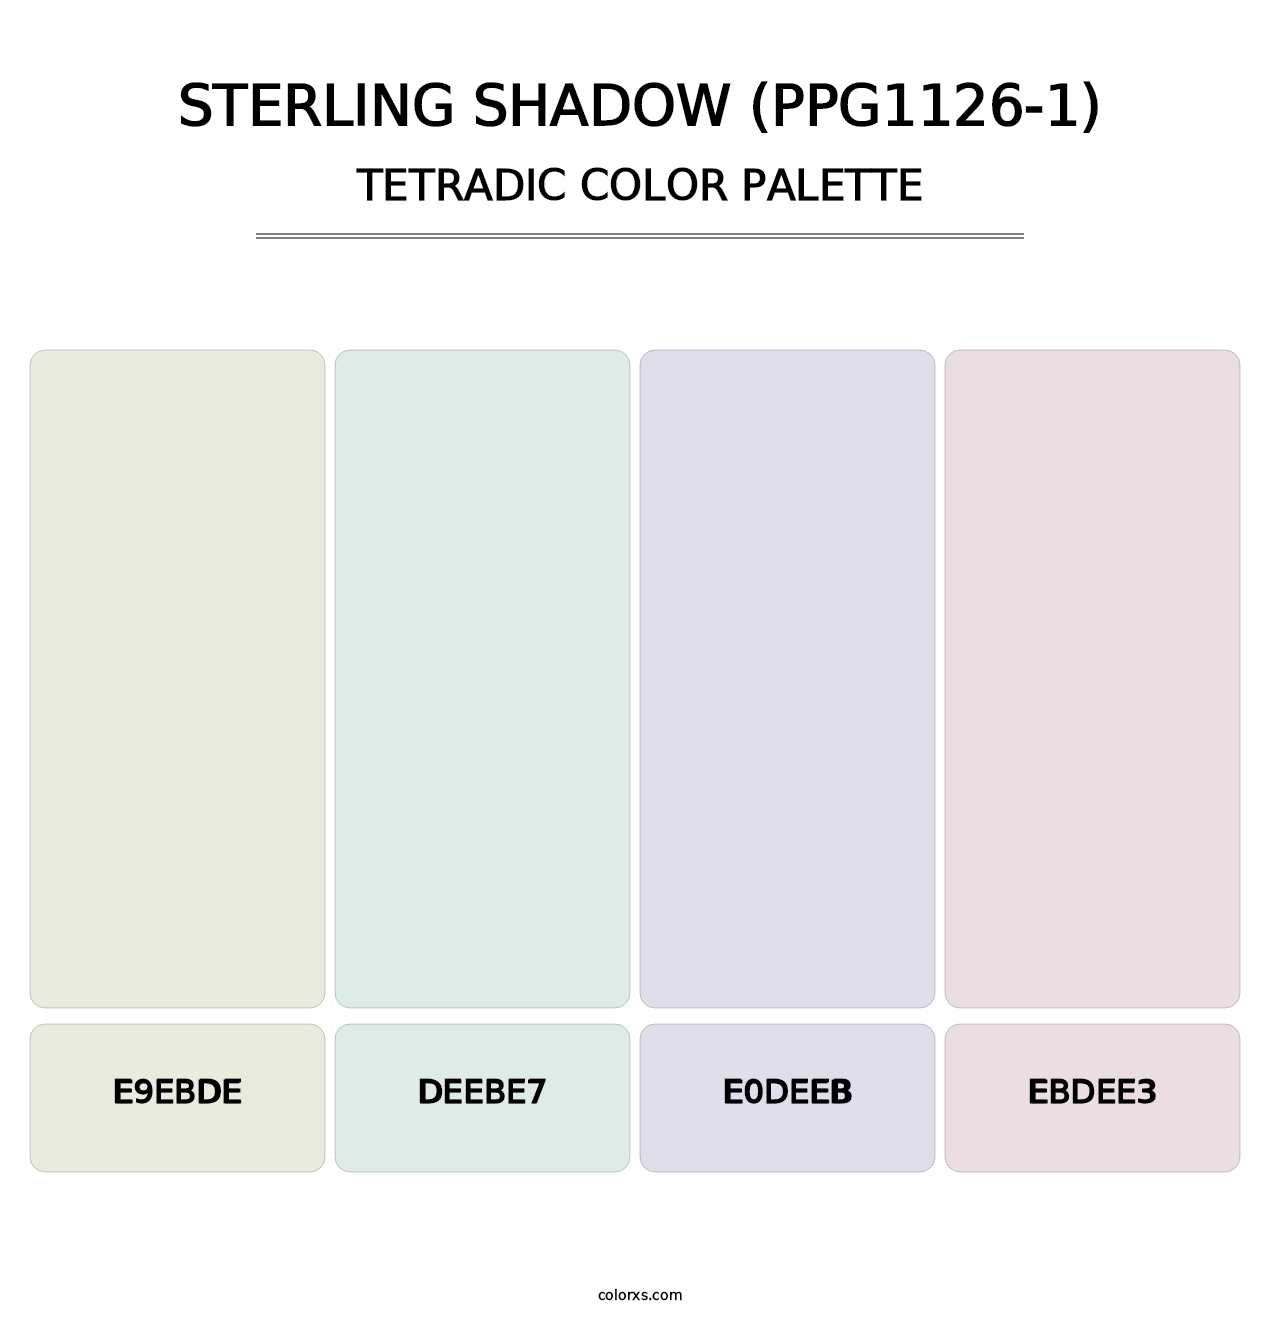 Sterling Shadow (PPG1126-1) - Tetradic Color Palette